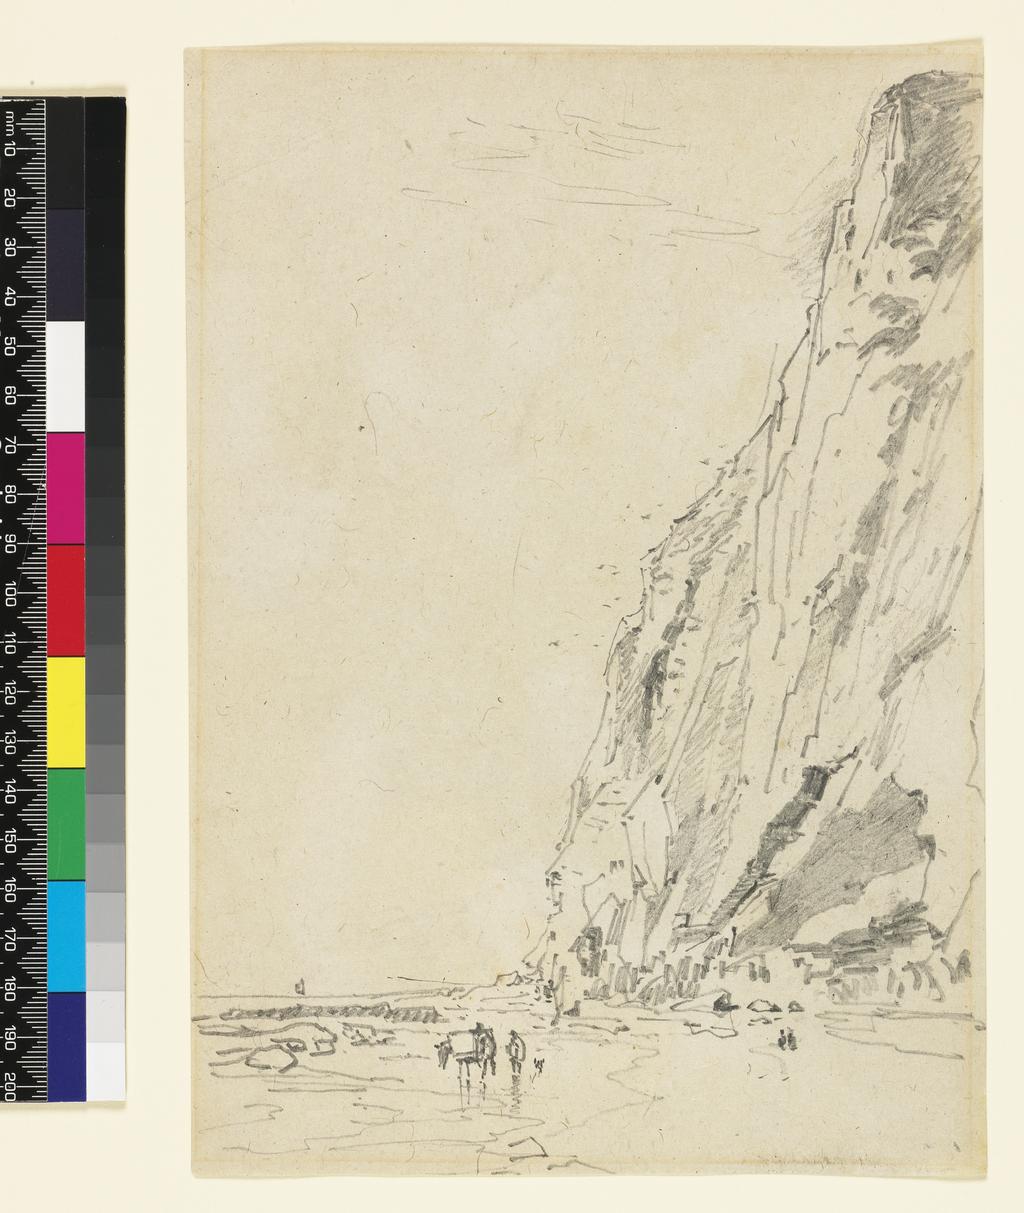 An image of Recto: The foot of the cliff. A page from a sketchbook, unsigned. Cox, David, the elder (British, 1783-1859). Graphite on paper, 19th century. Batchelor Collection.